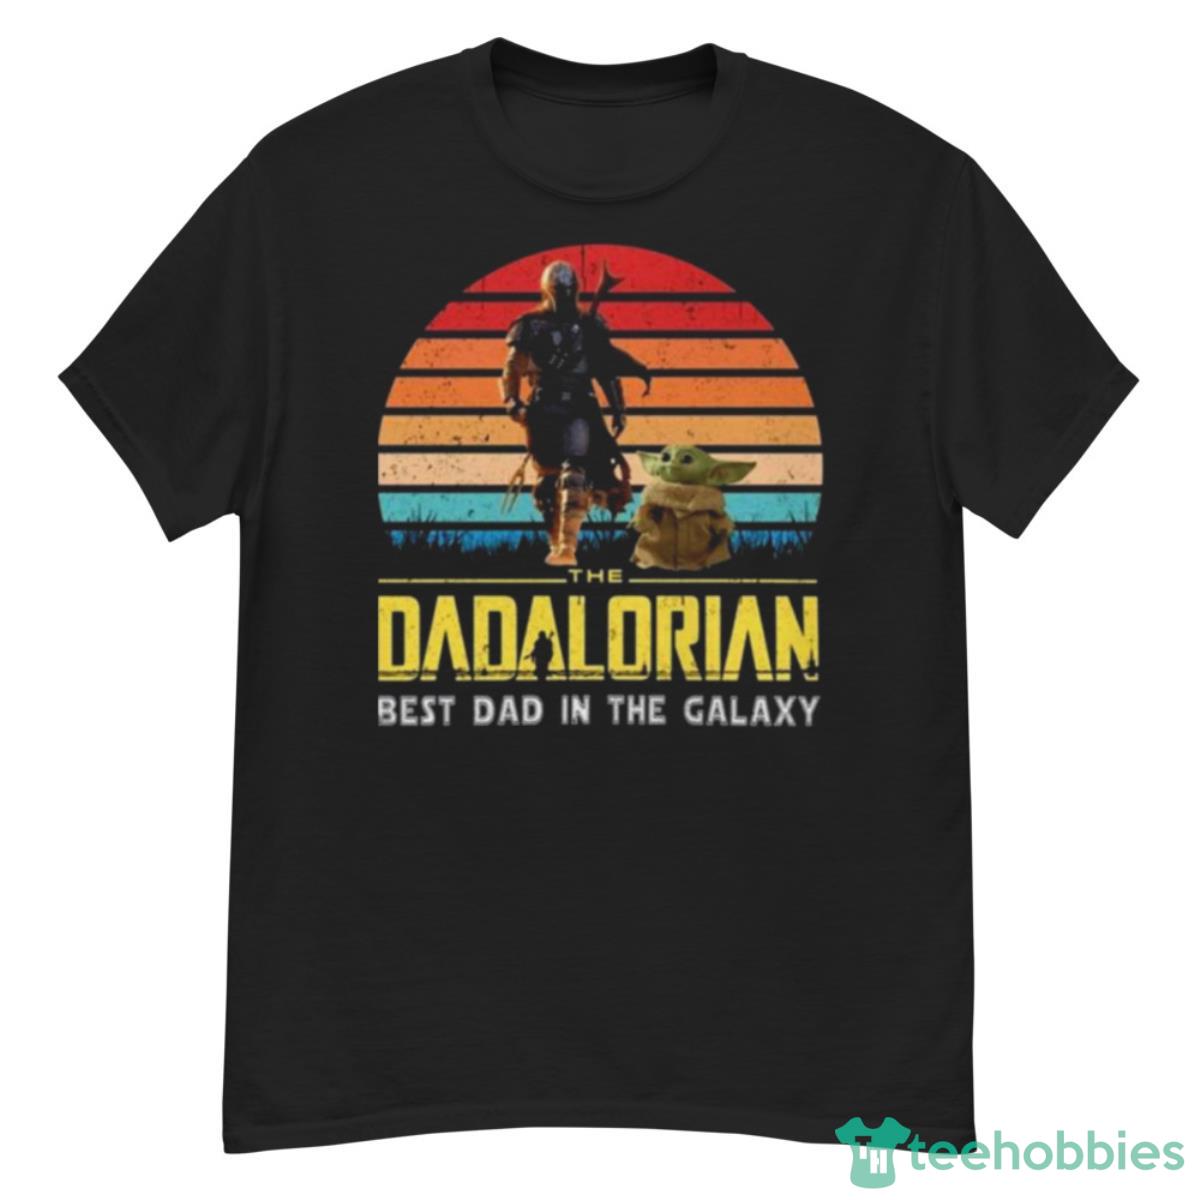 2023 The Dadalorian Best Dad In The Galaxy NBA Shirt Product Photo 1